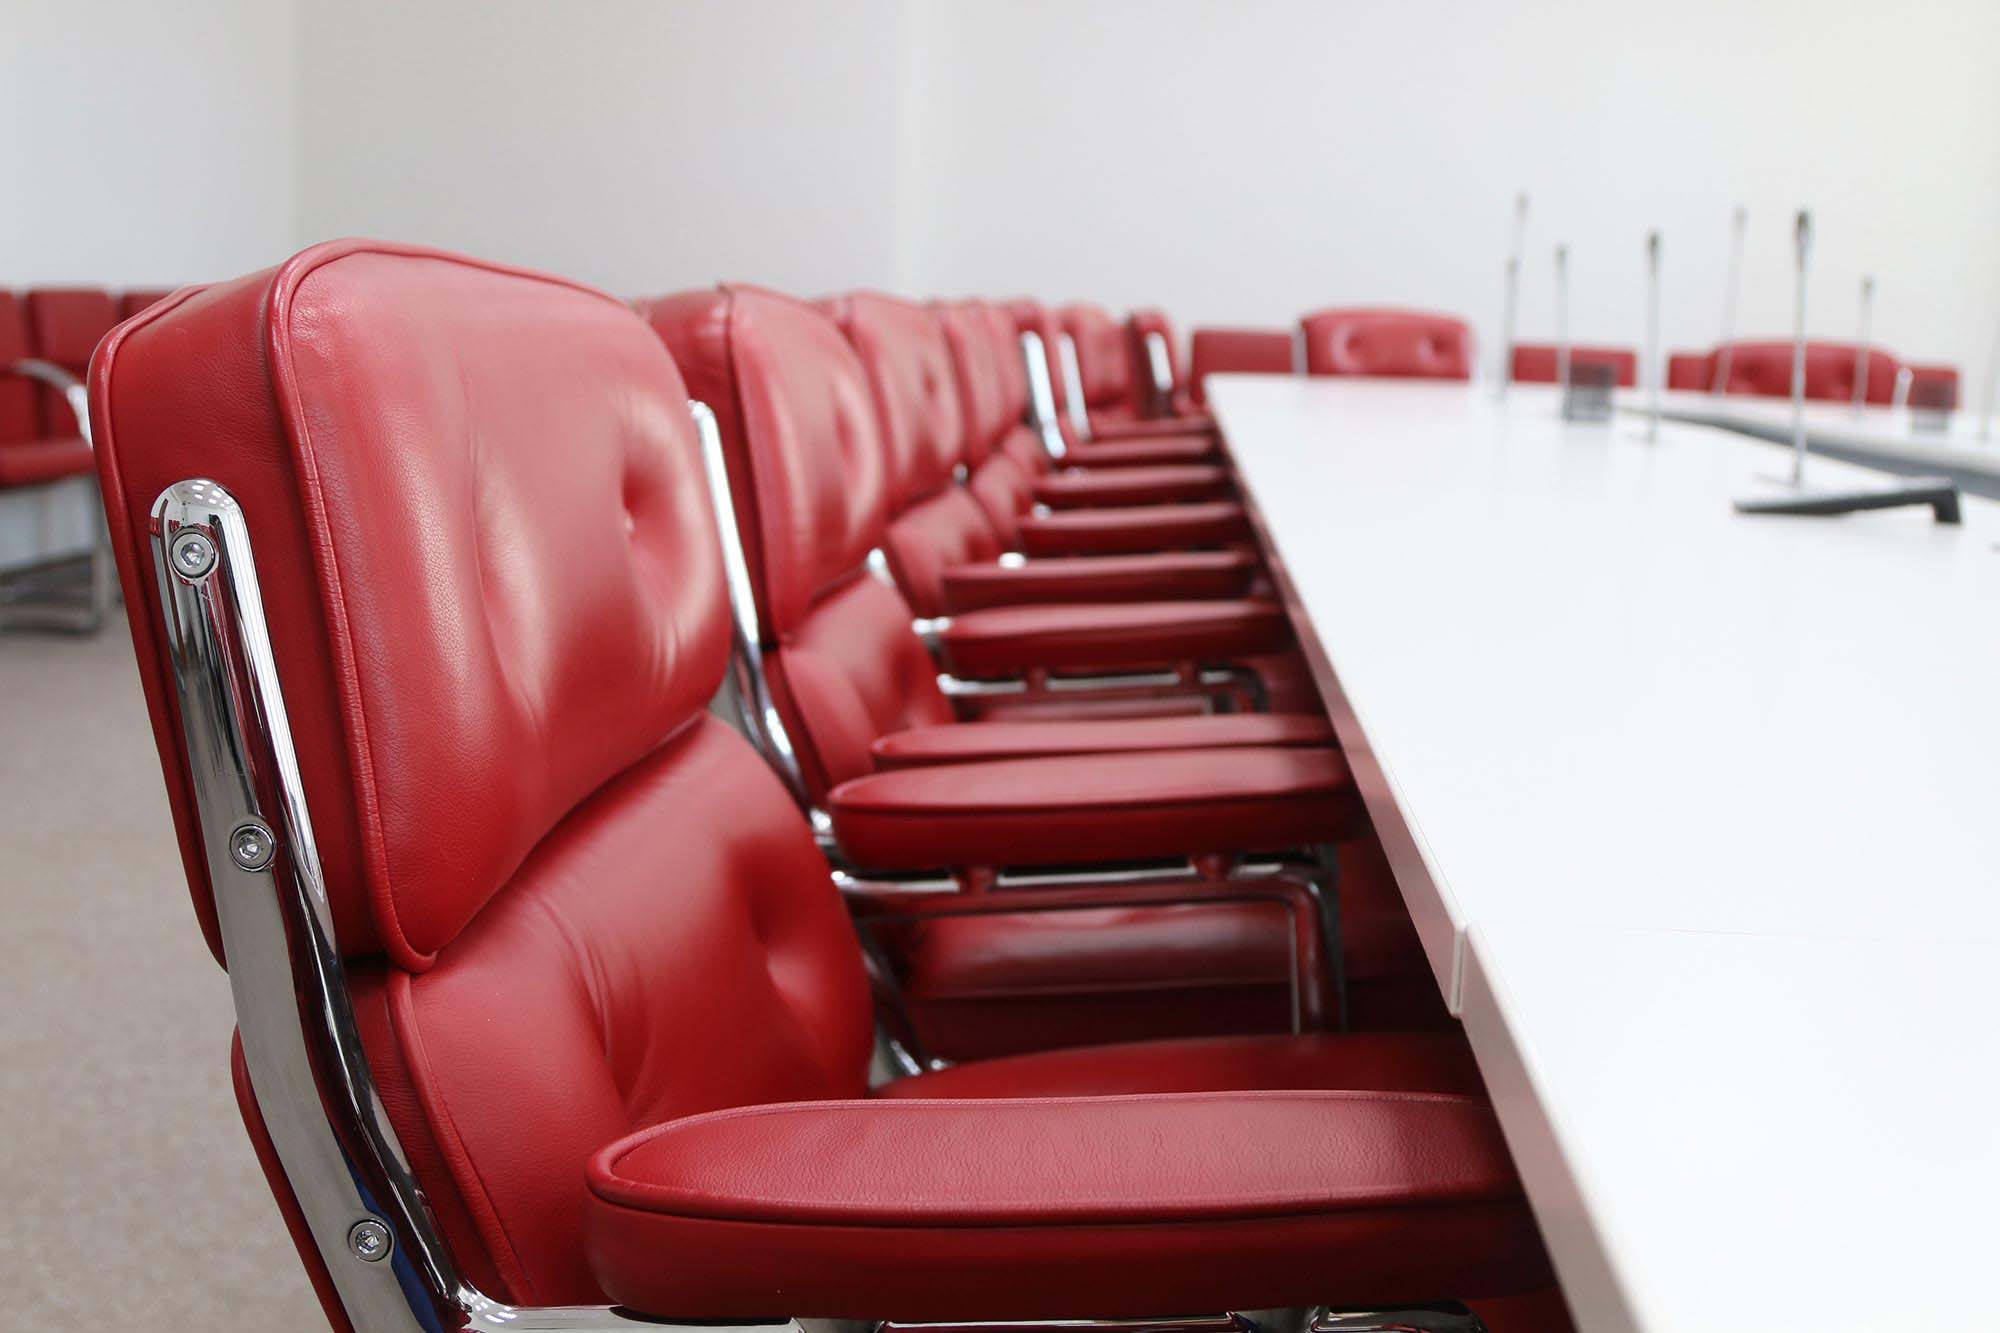 Meetings & Conferences – Luxury meeting room set up with red leather chairs